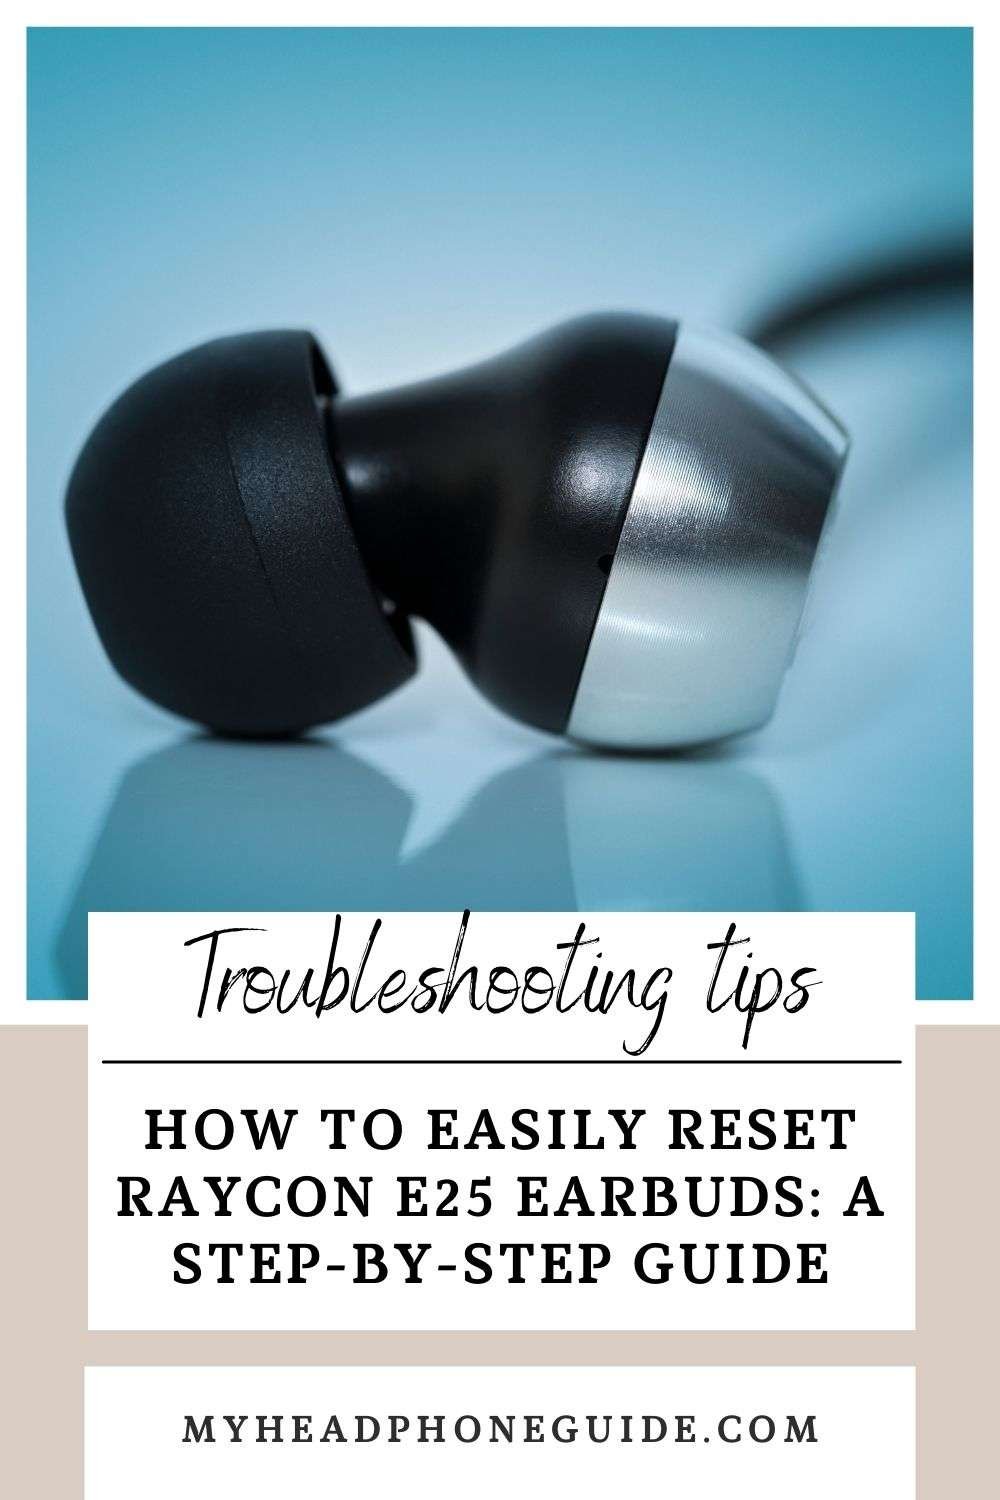 How to Easily Reset Raycon E25 Earbuds